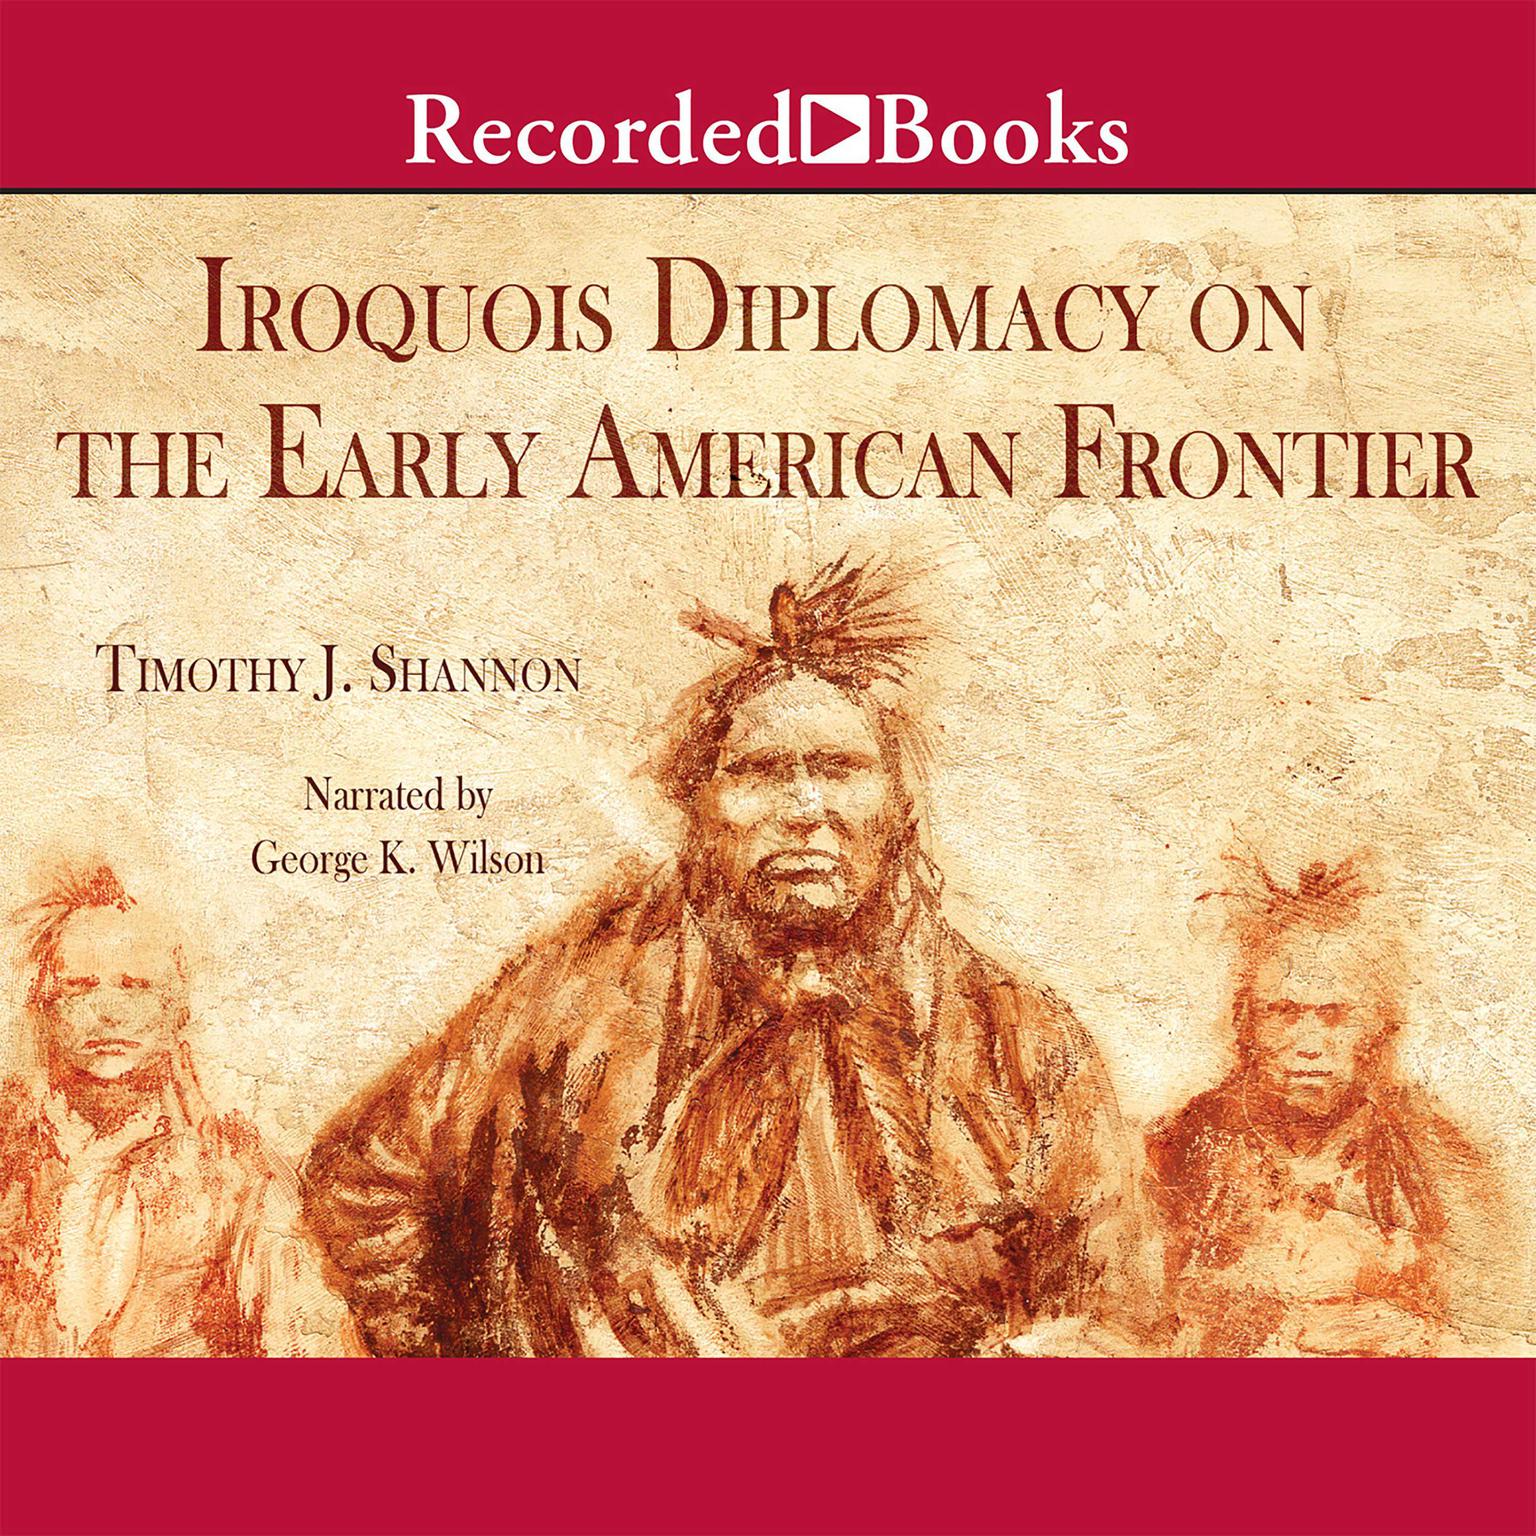 Iroquois Diplomacy on the Early American Frontier Audiobook, by Timothy J. Shannon